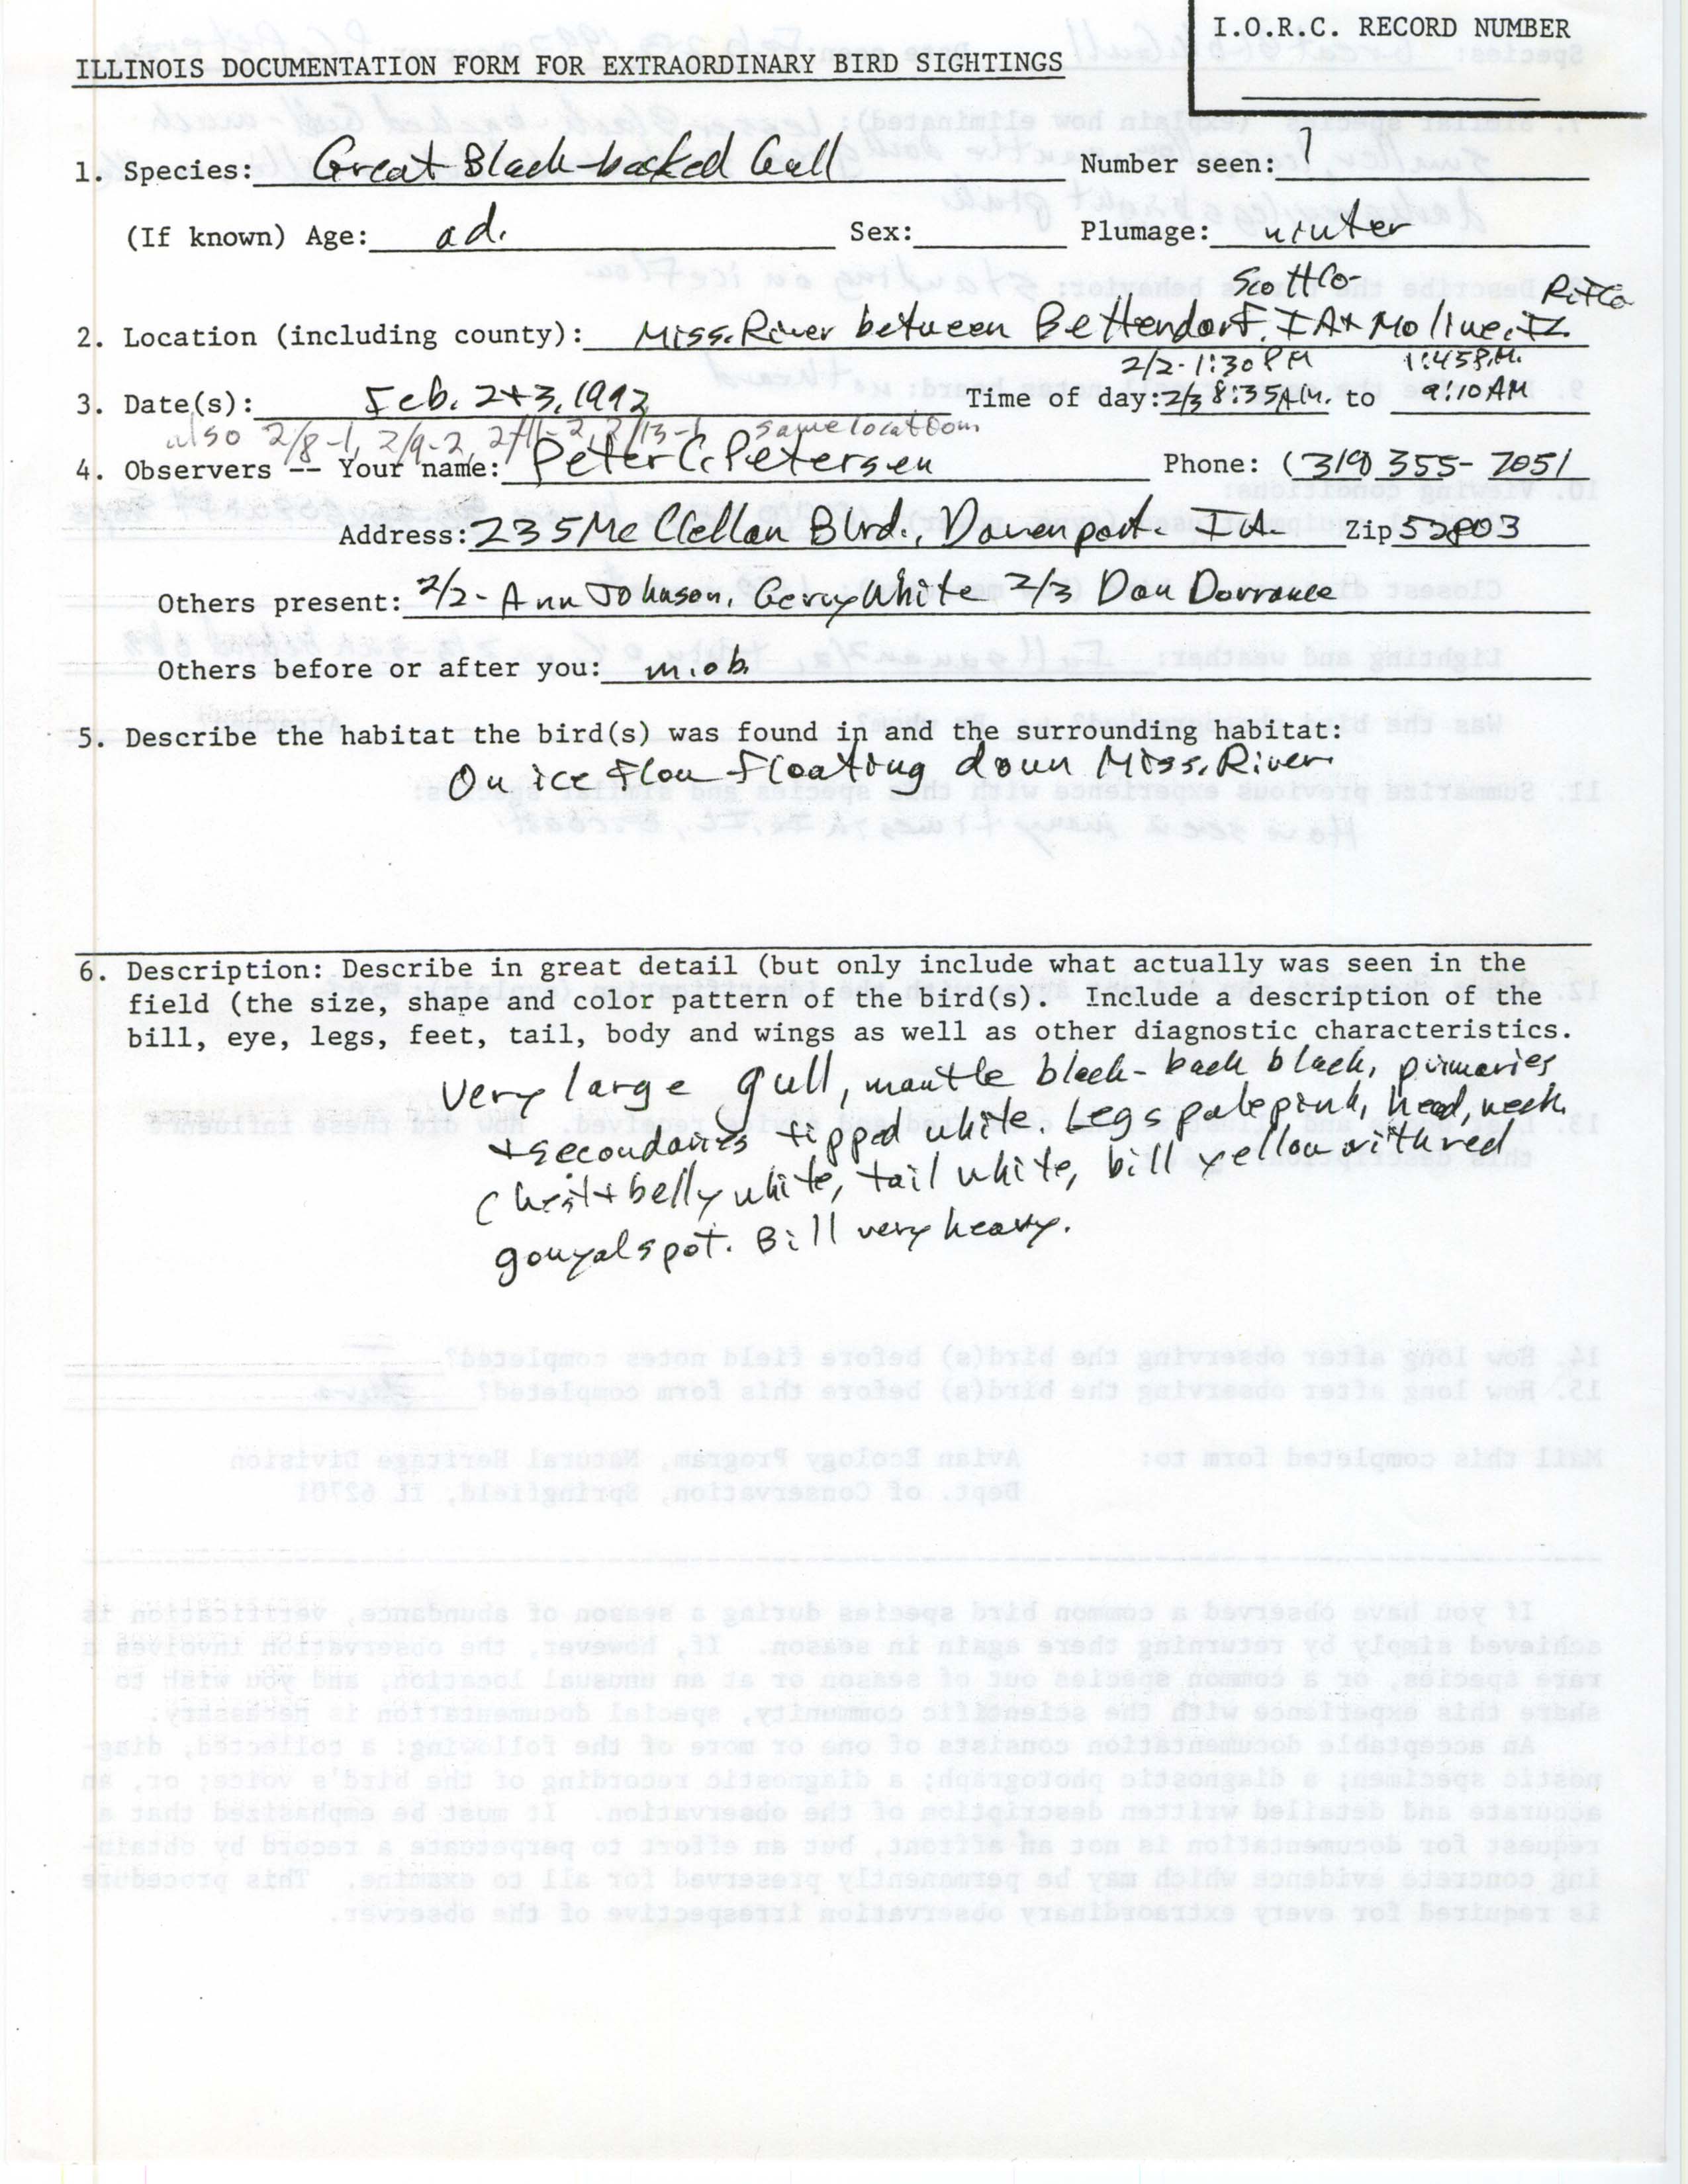 Rare bird documentation form for Great Black-backed Gull at the Mississippi River between Bettendorf and Moline in 1992